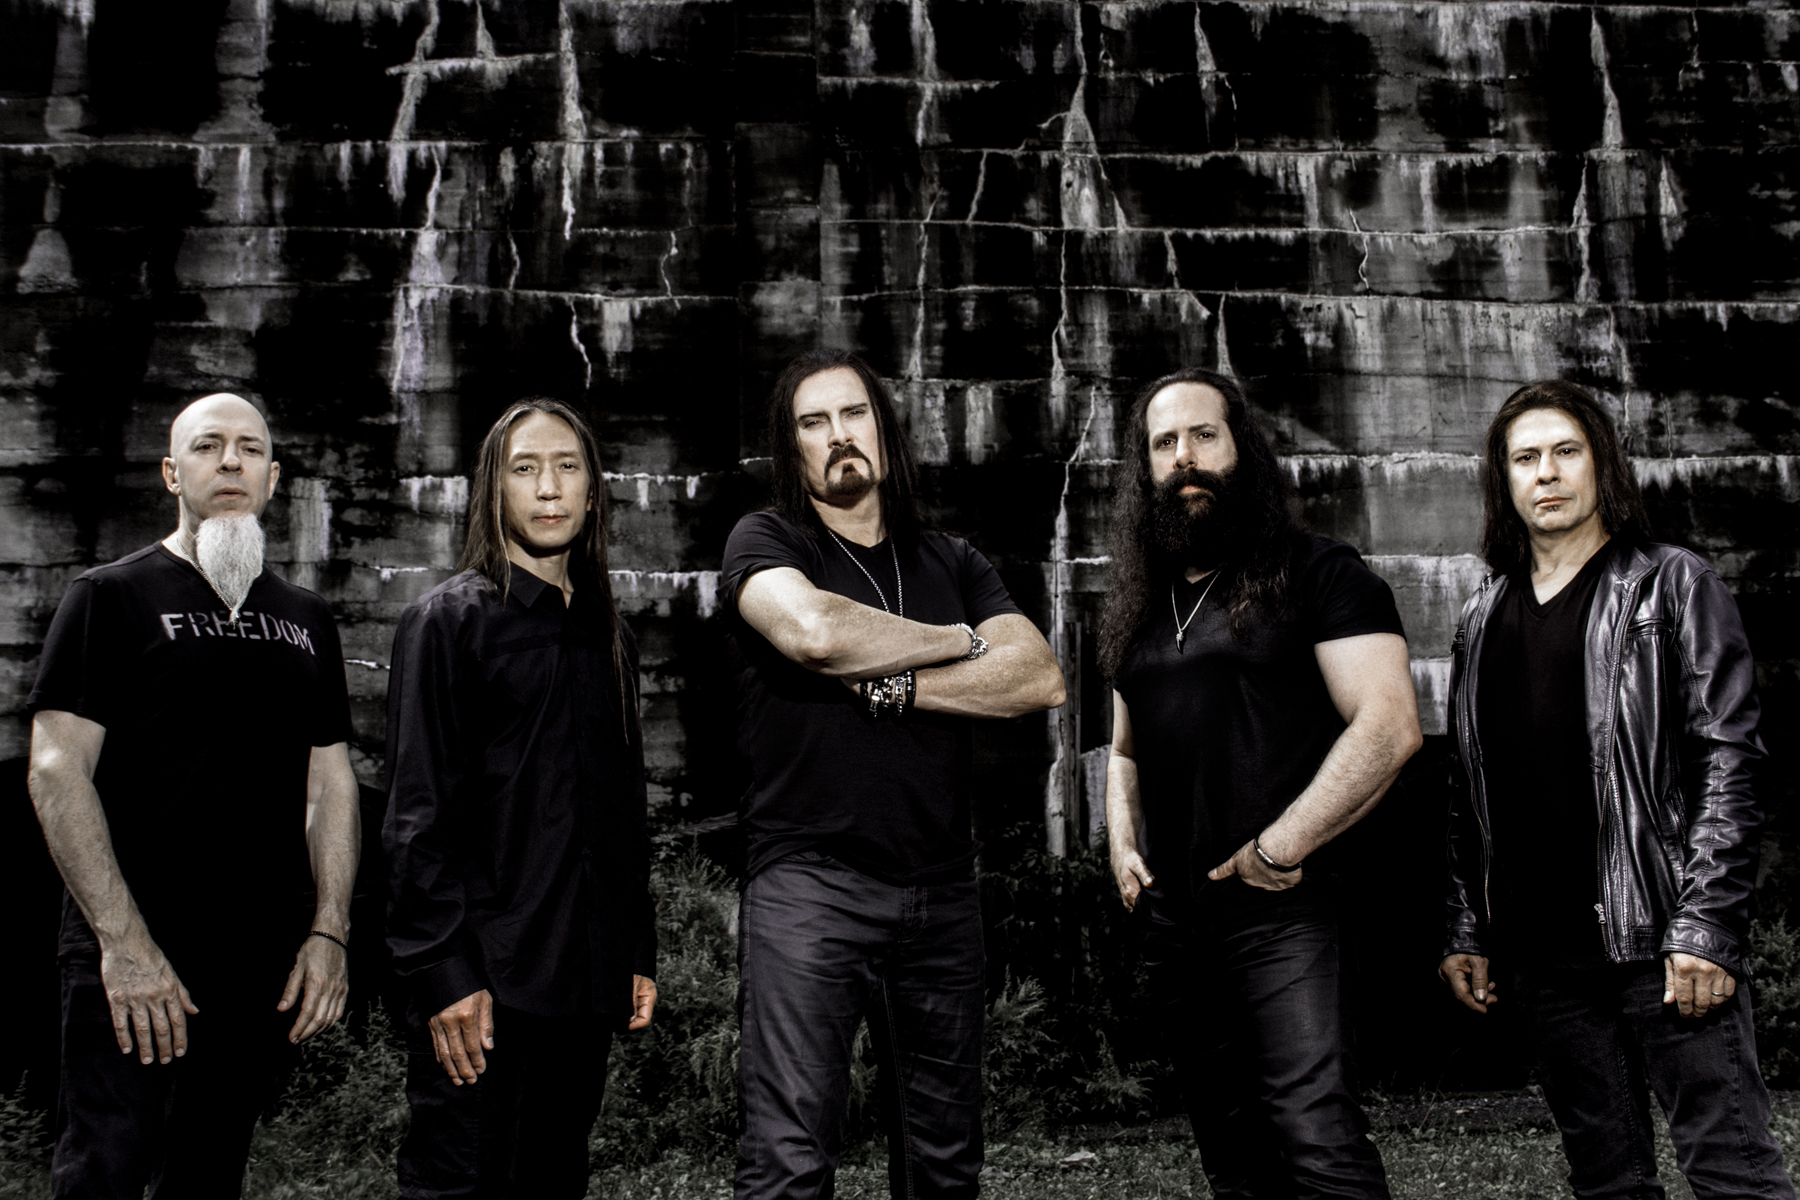 Vezi trupa DREAM THEATER Performând ‘The Spirit Carries pe ‘ From ‘Distant Memories – Live In London’